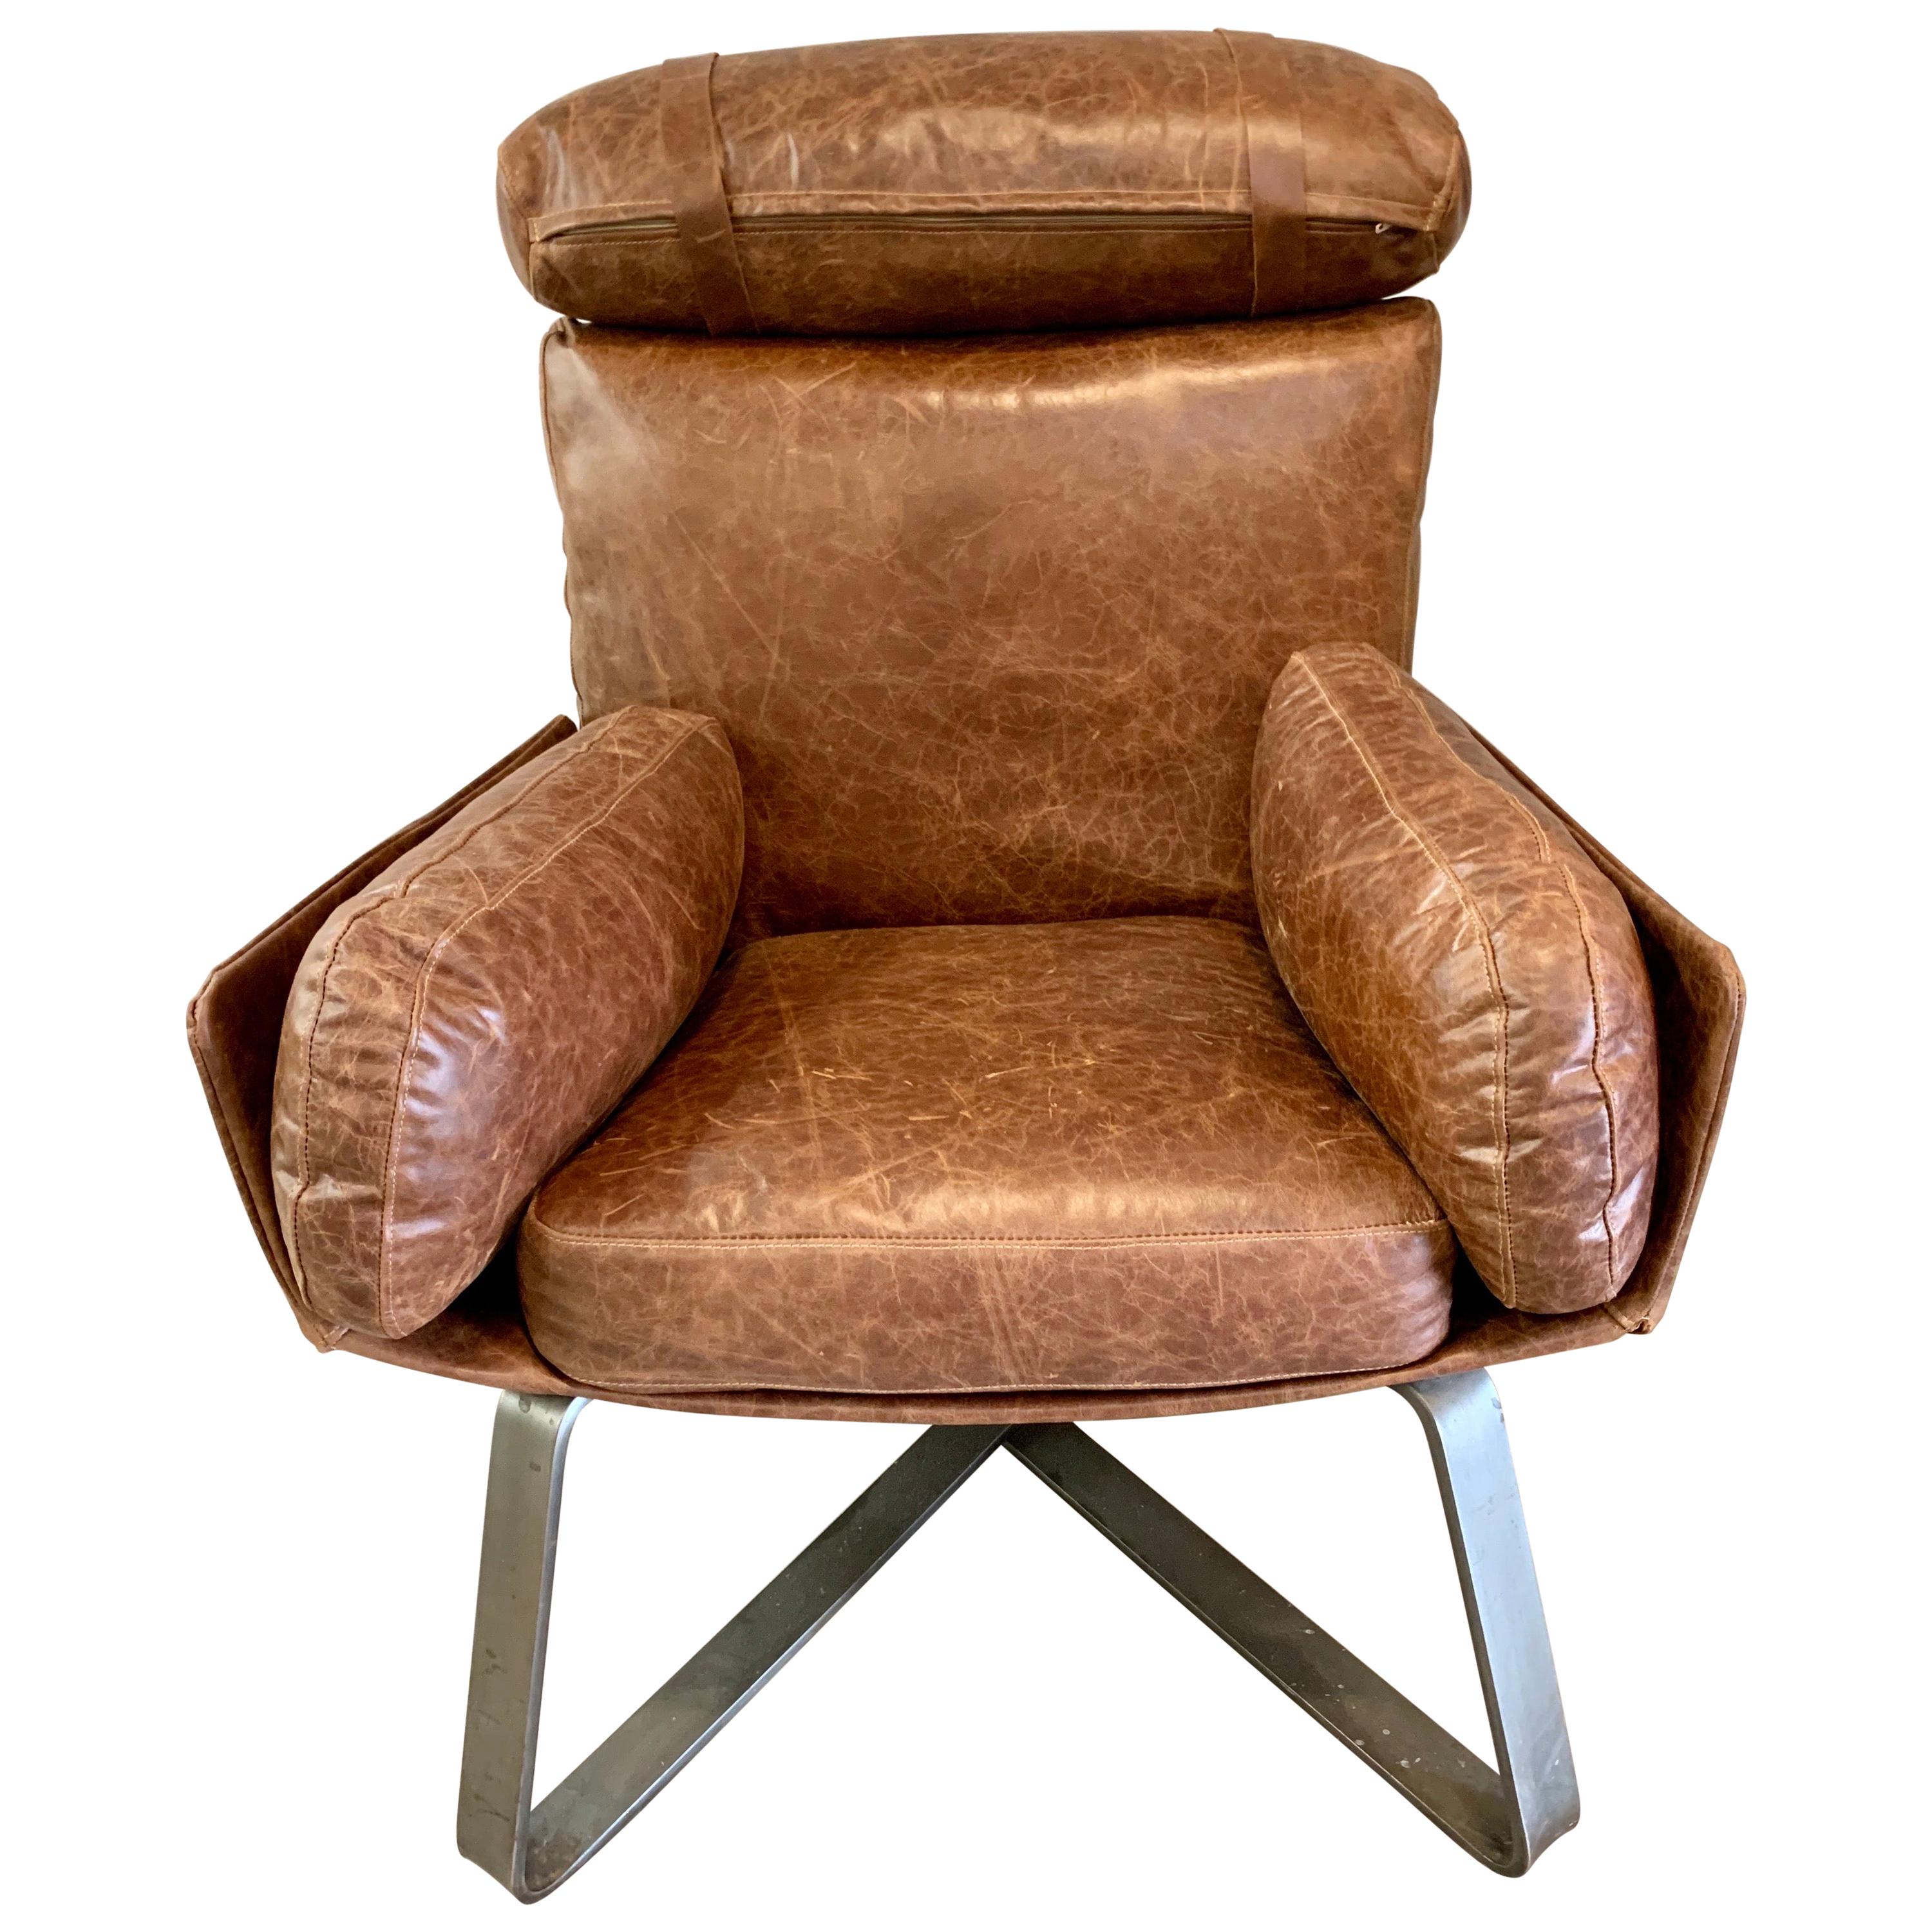 Stitched Leather Lounge Chair